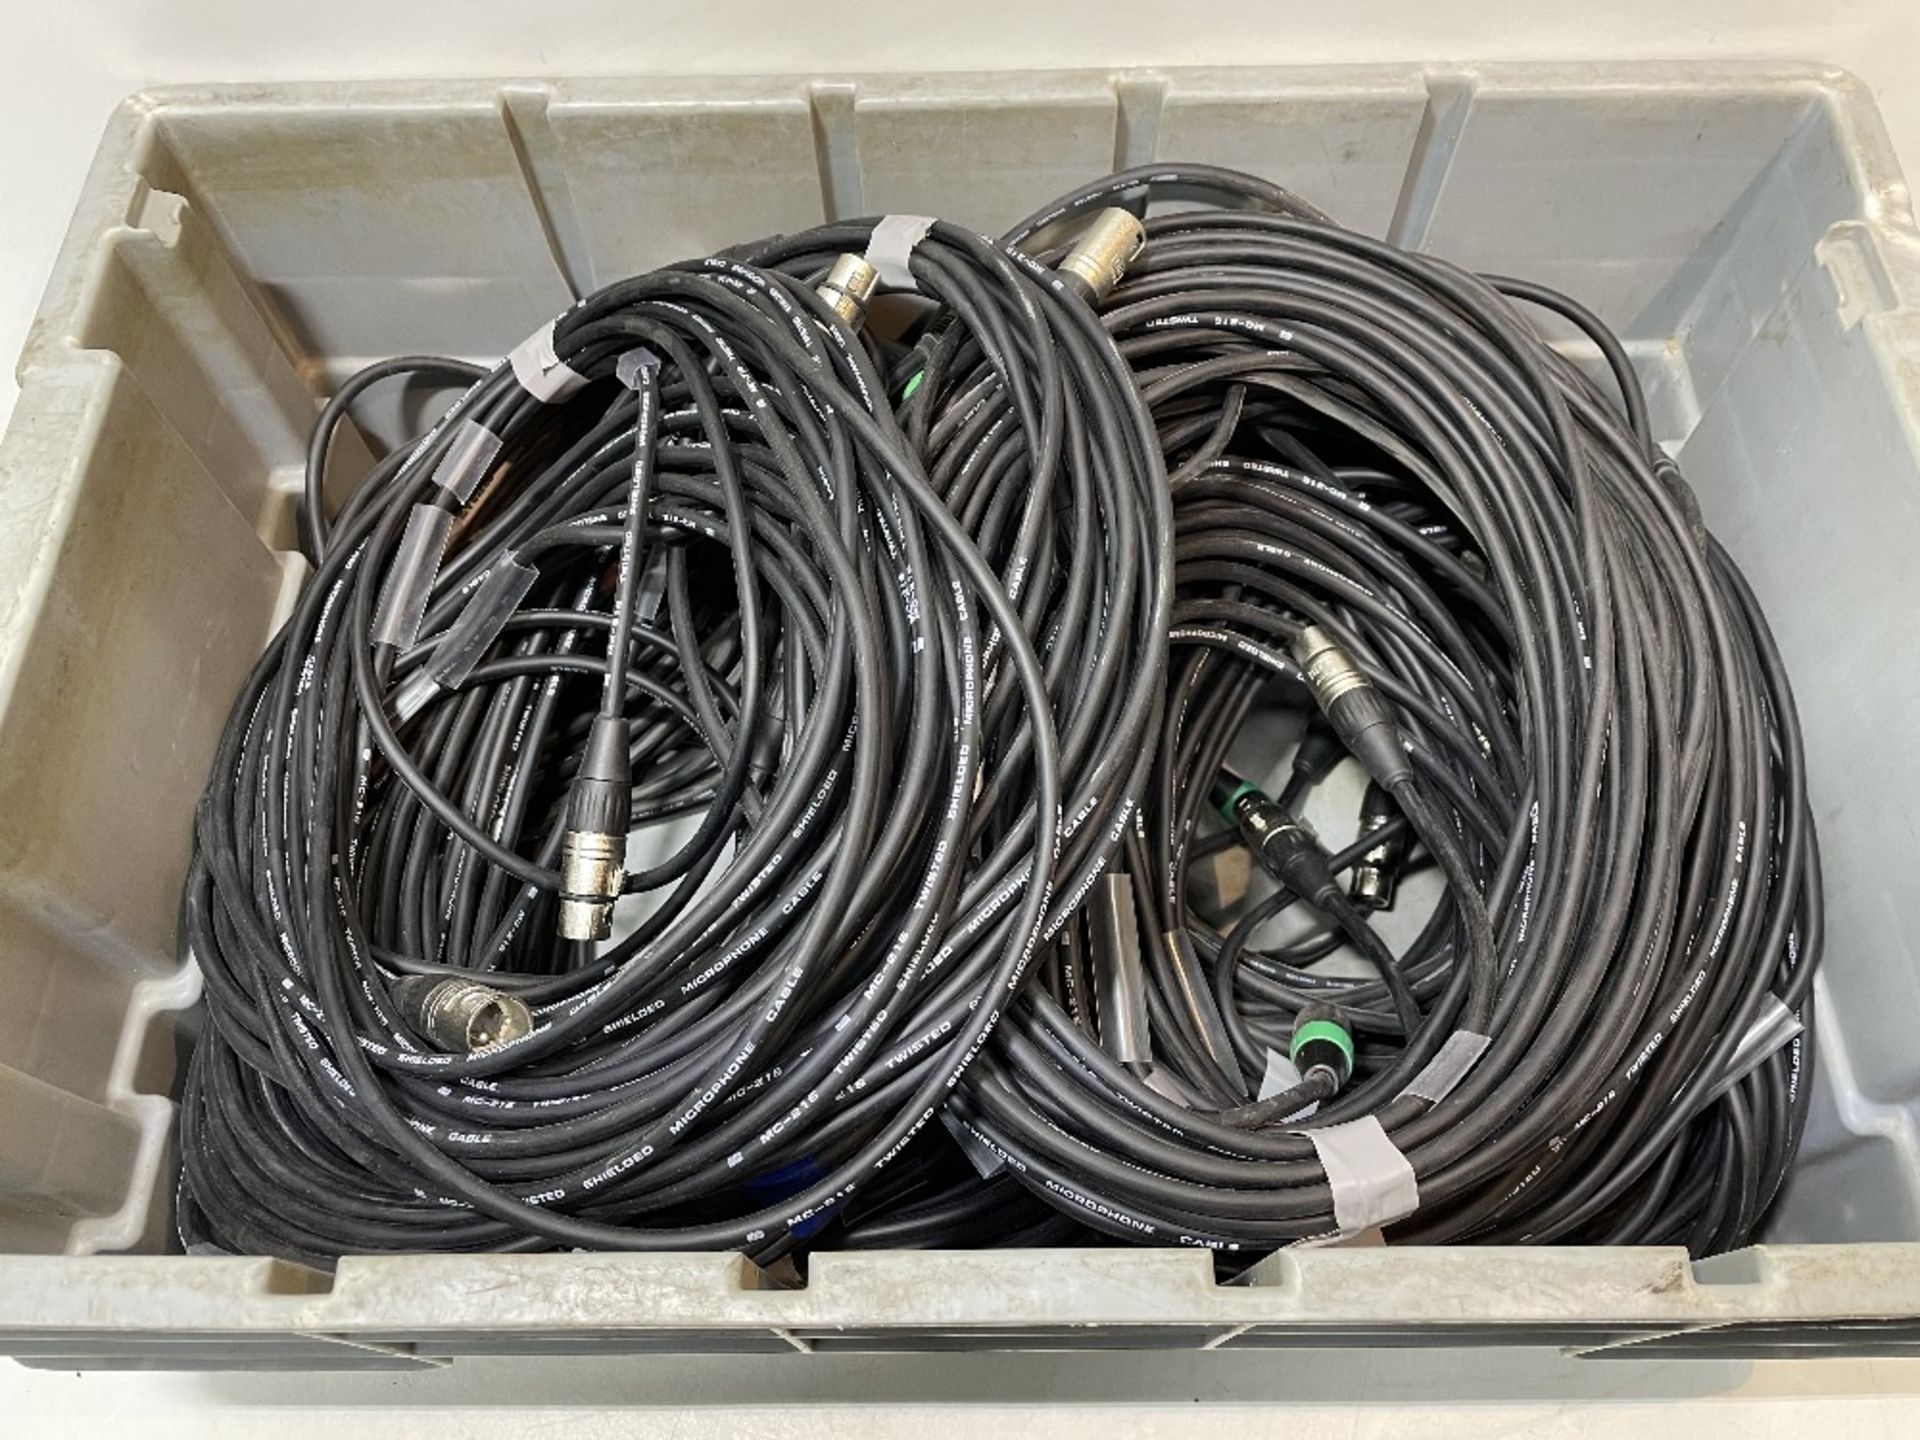 24 x Approx 10m DMX Cables - Image 5 of 5